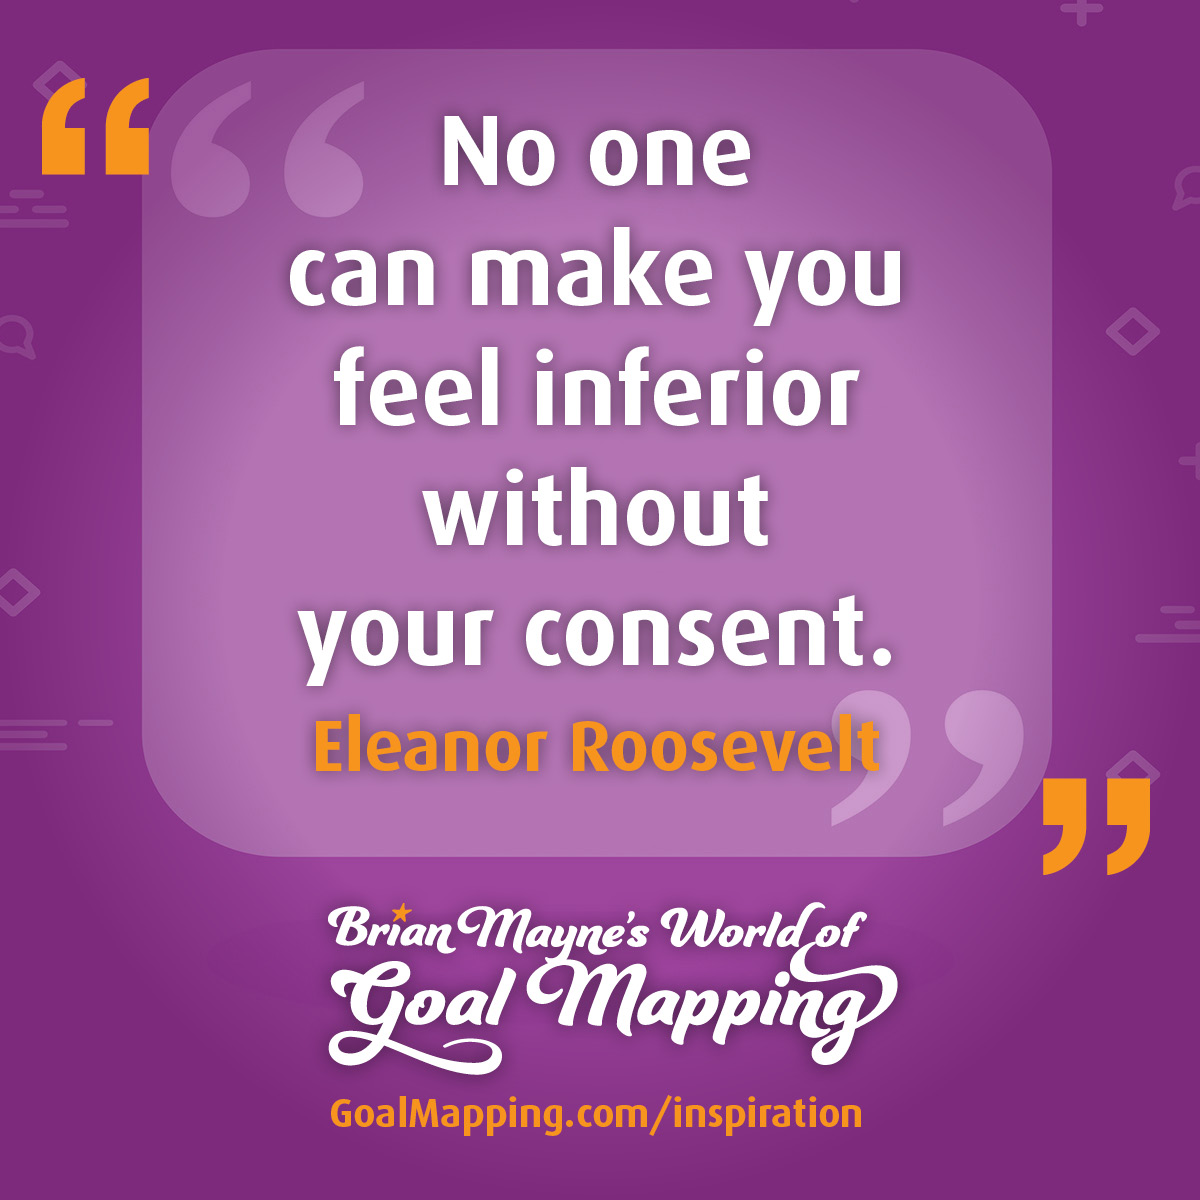 "No one can make you feel inferior without your consent." Eleanor Roosevelt